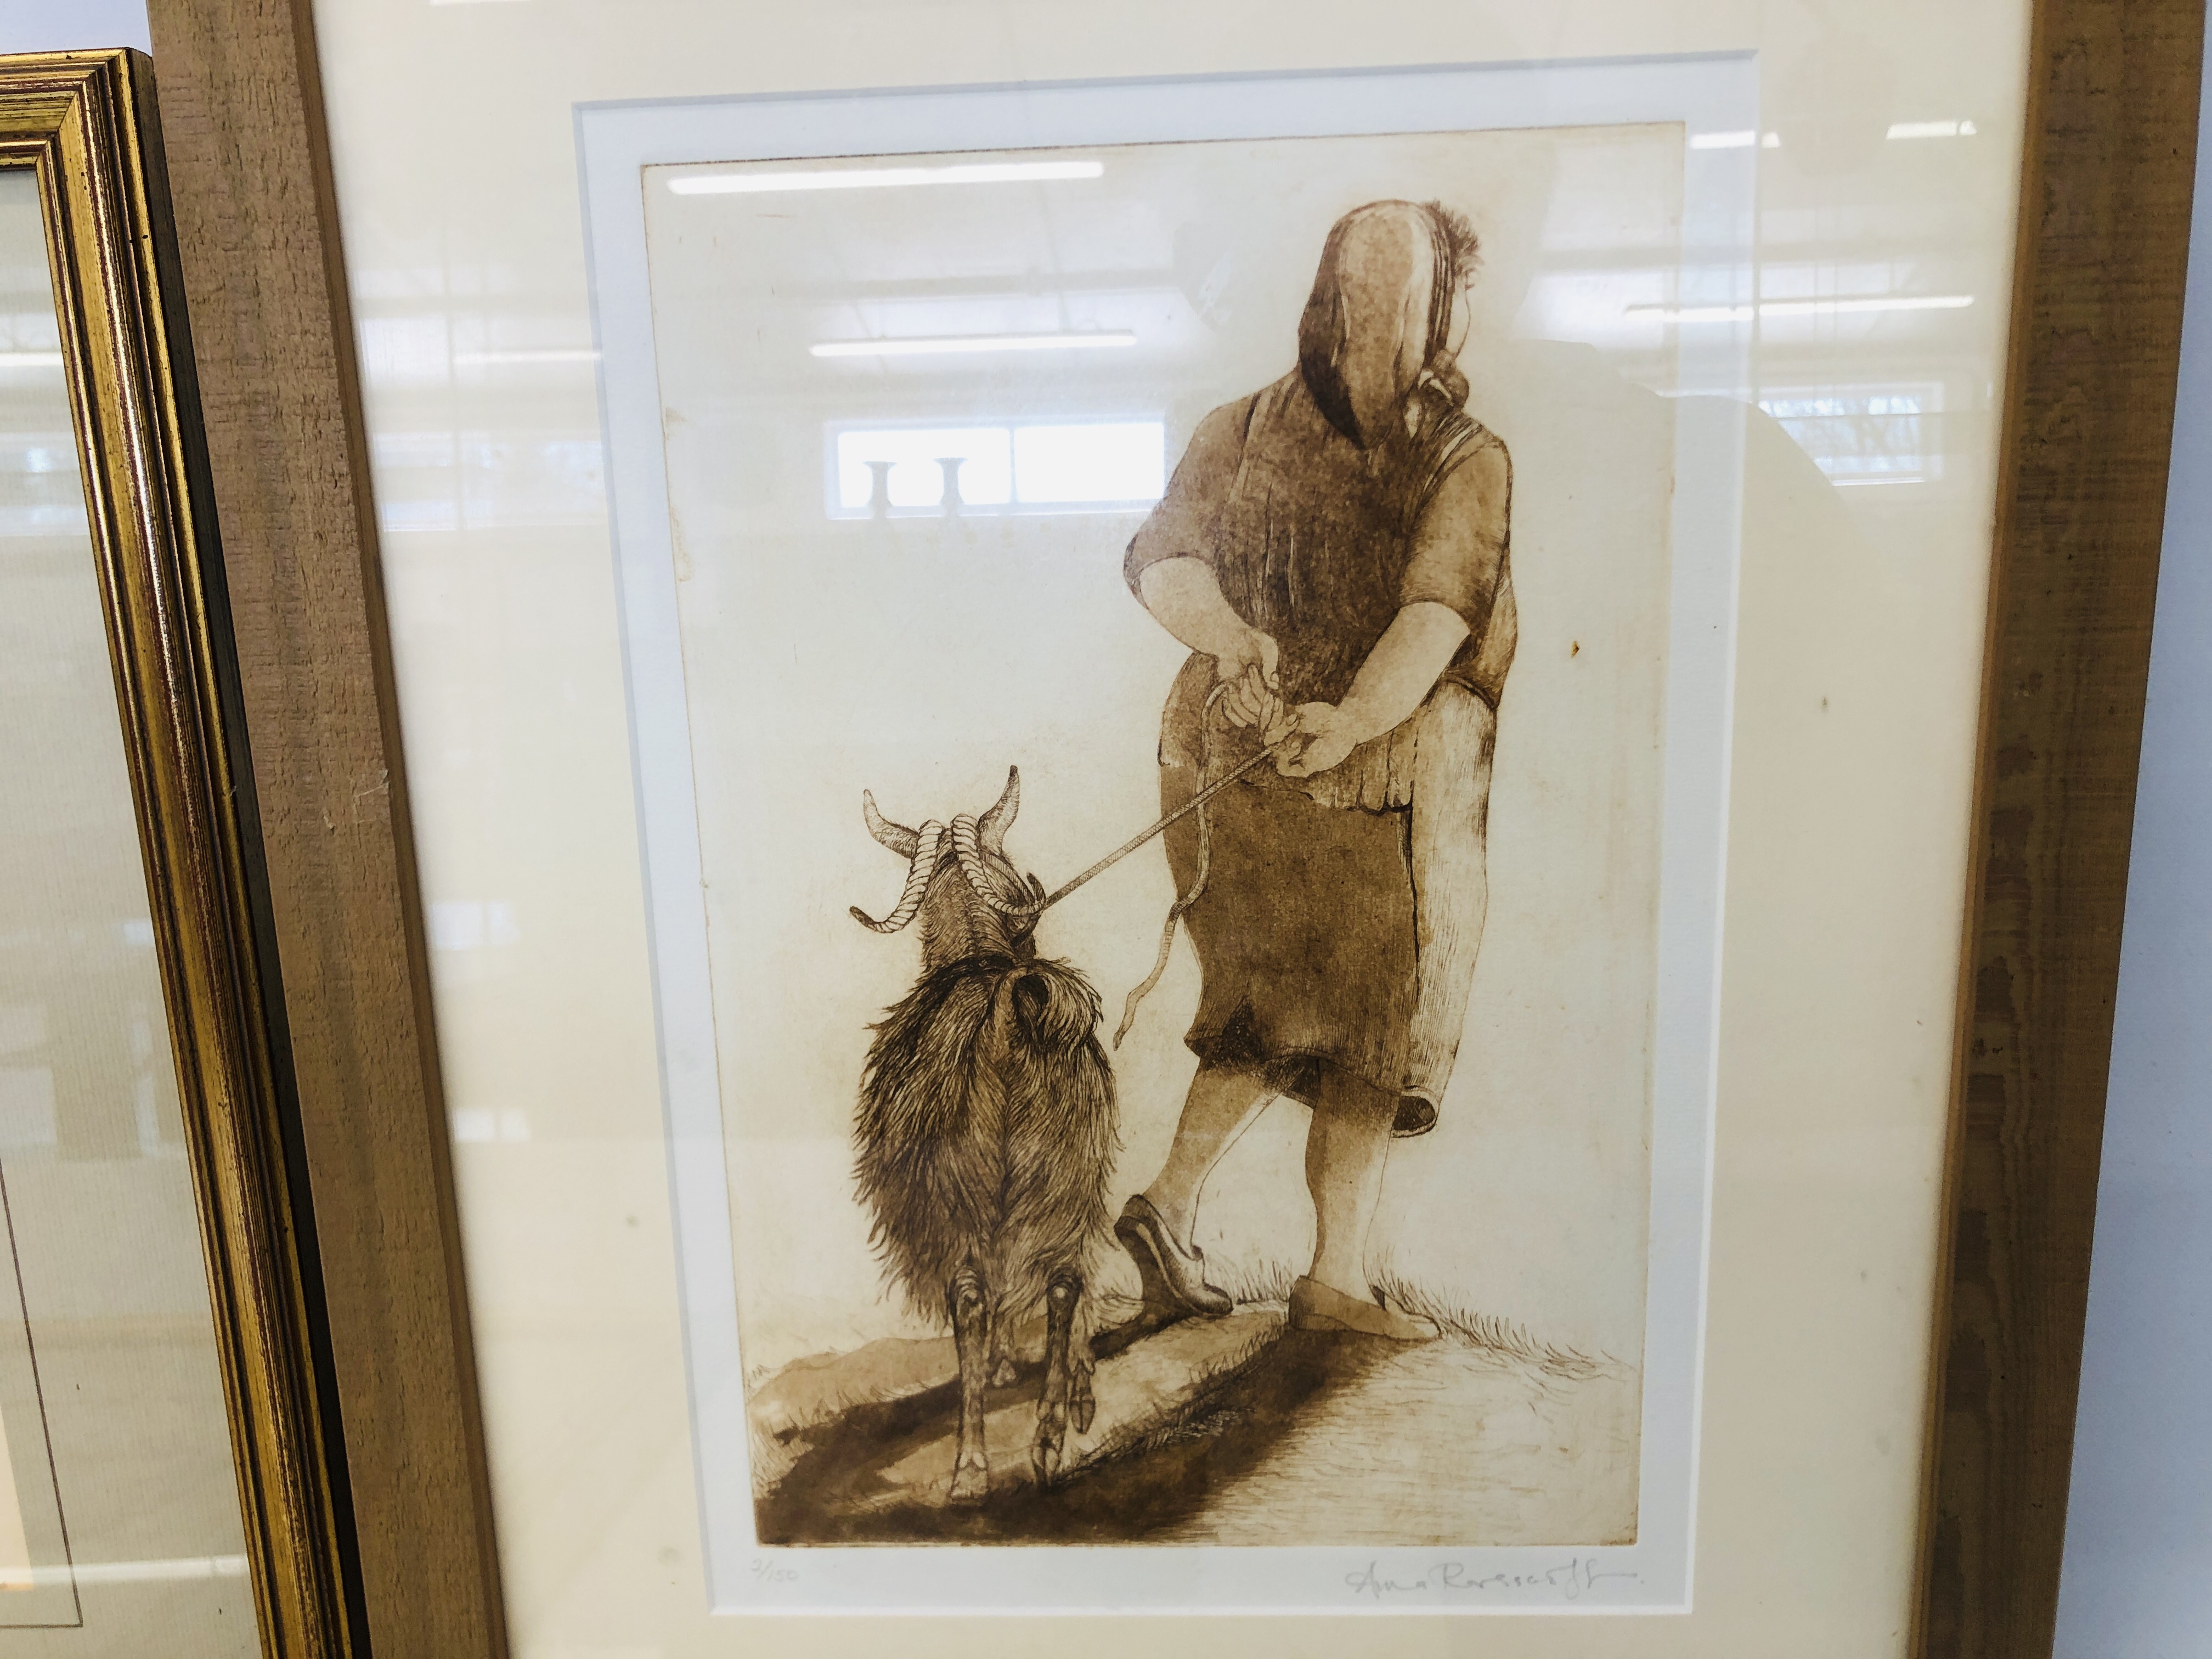 FRAMED LIMITED EDITION ETCHING "GOING HOME" 2/150 BEARING PENCIL SIGNATURE ANNA RAVENSCROFT + - Image 5 of 7